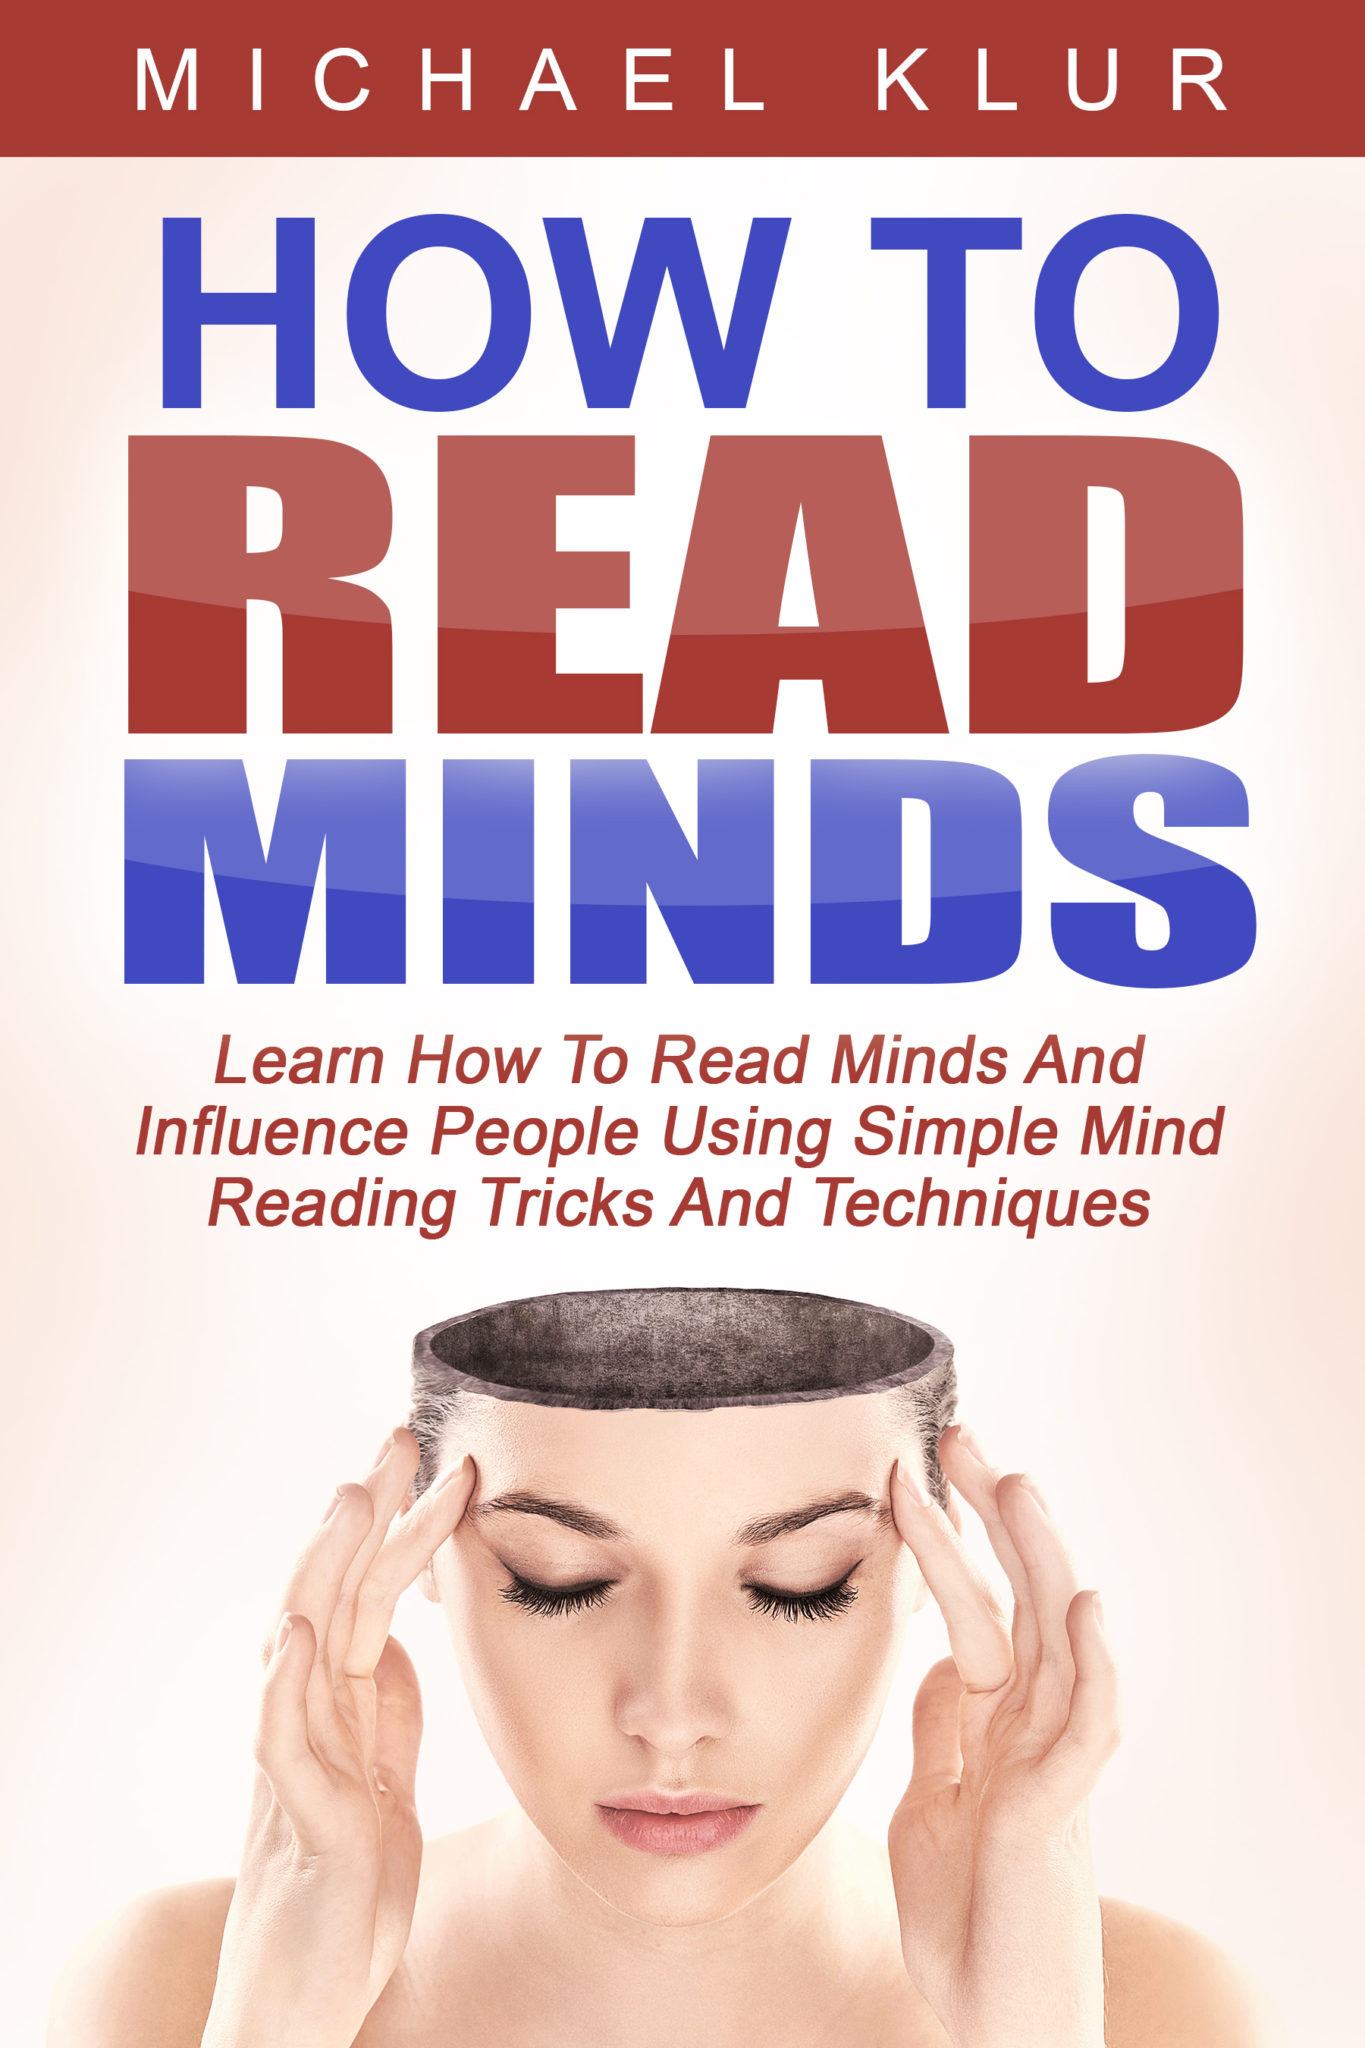 FREE: How To Read Minds – Learn How To Read Minds And Influence People Using Simple Mind Reading Tricks And Techniques by Micheal Klur